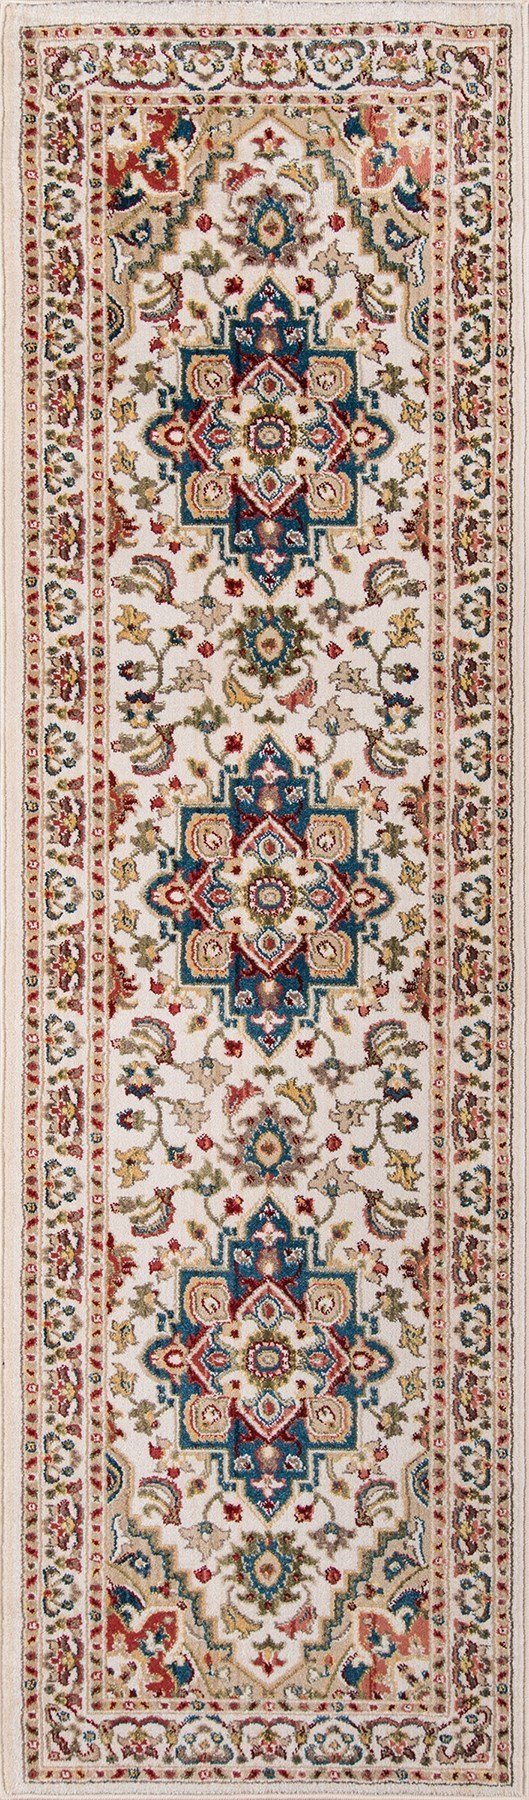 Lenox Area Rugs LE-01 Ivory 100% Poly Product of Turkey